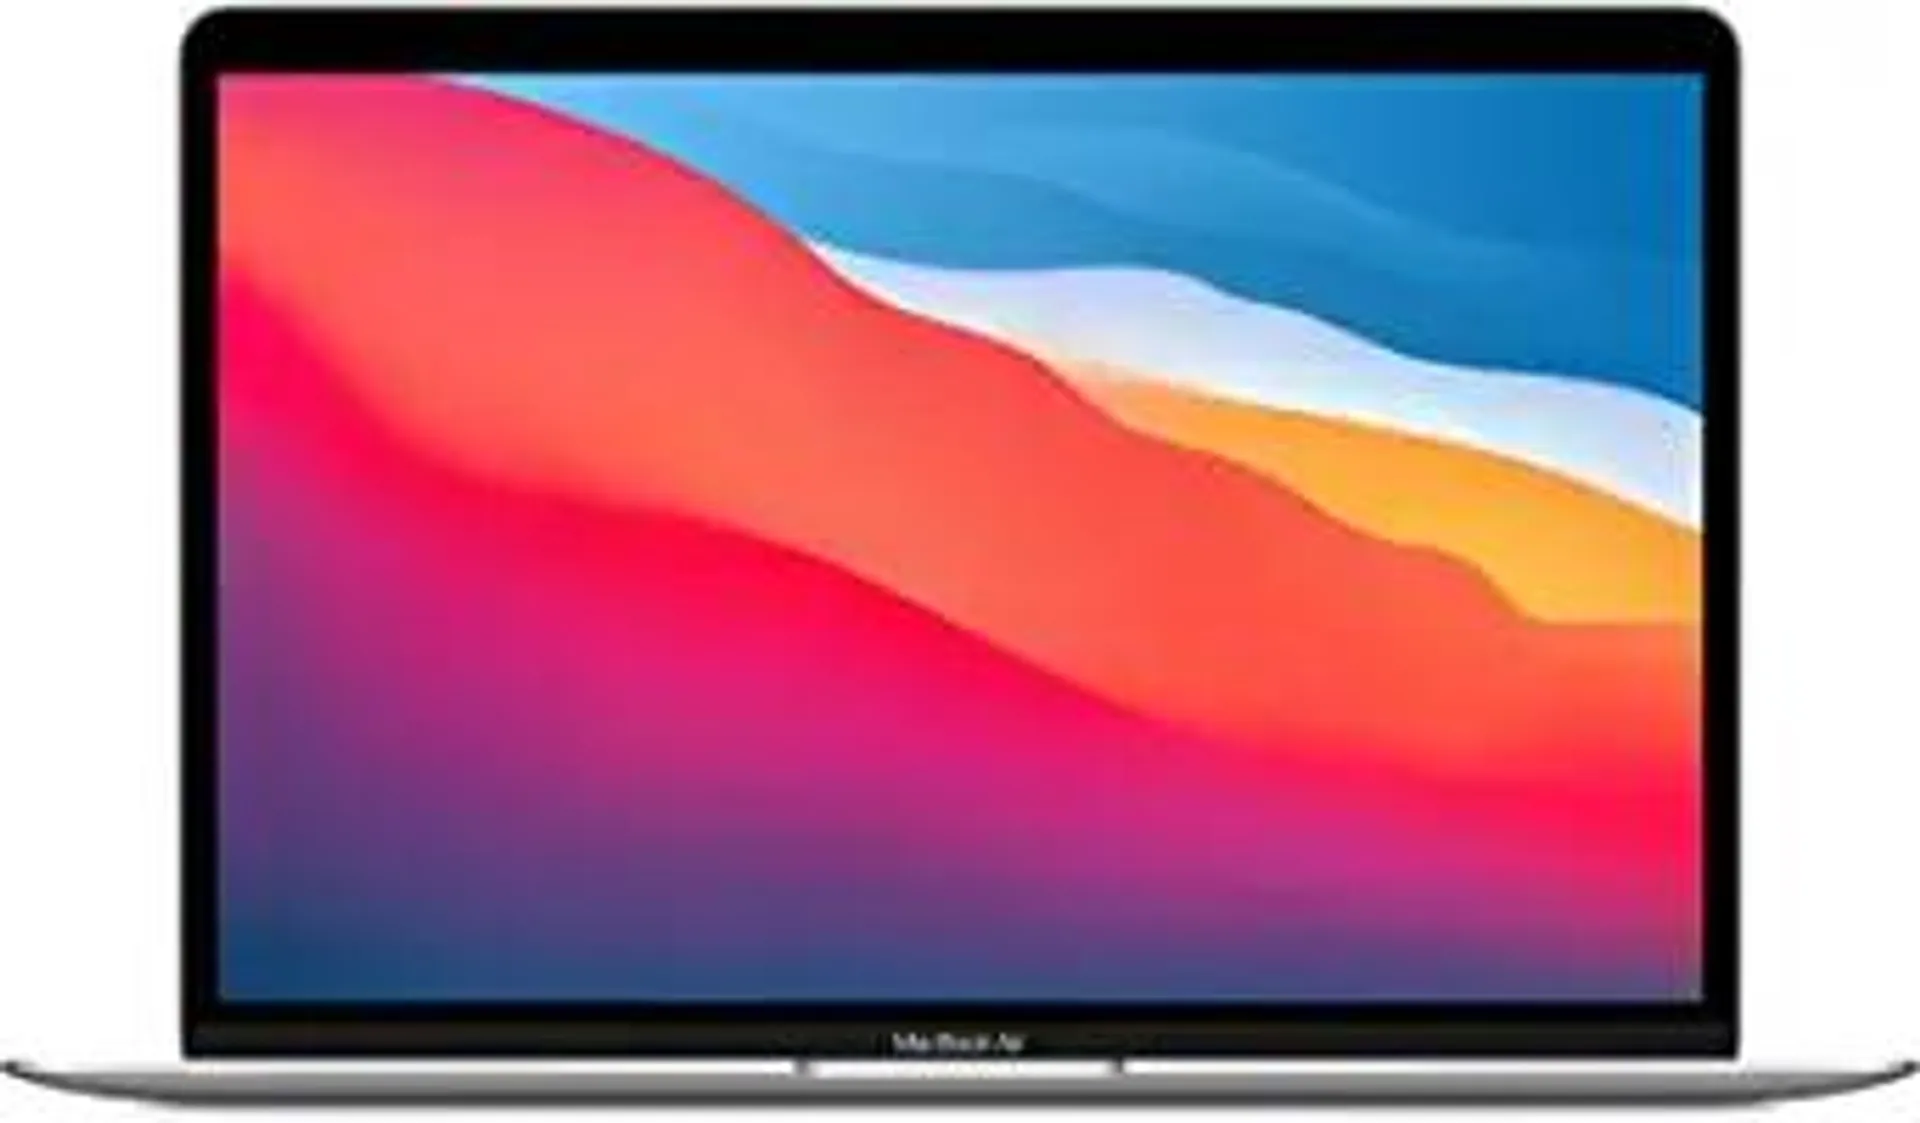 Apple 2020 MacBook Air Laptop M1 Chip, 13" Retina Display, 8GB RAM, 256GB SSD Storage, Backlit Keyboard, FaceTime HD Camera, Touch ID. Works with iPhone/iPad; Silver